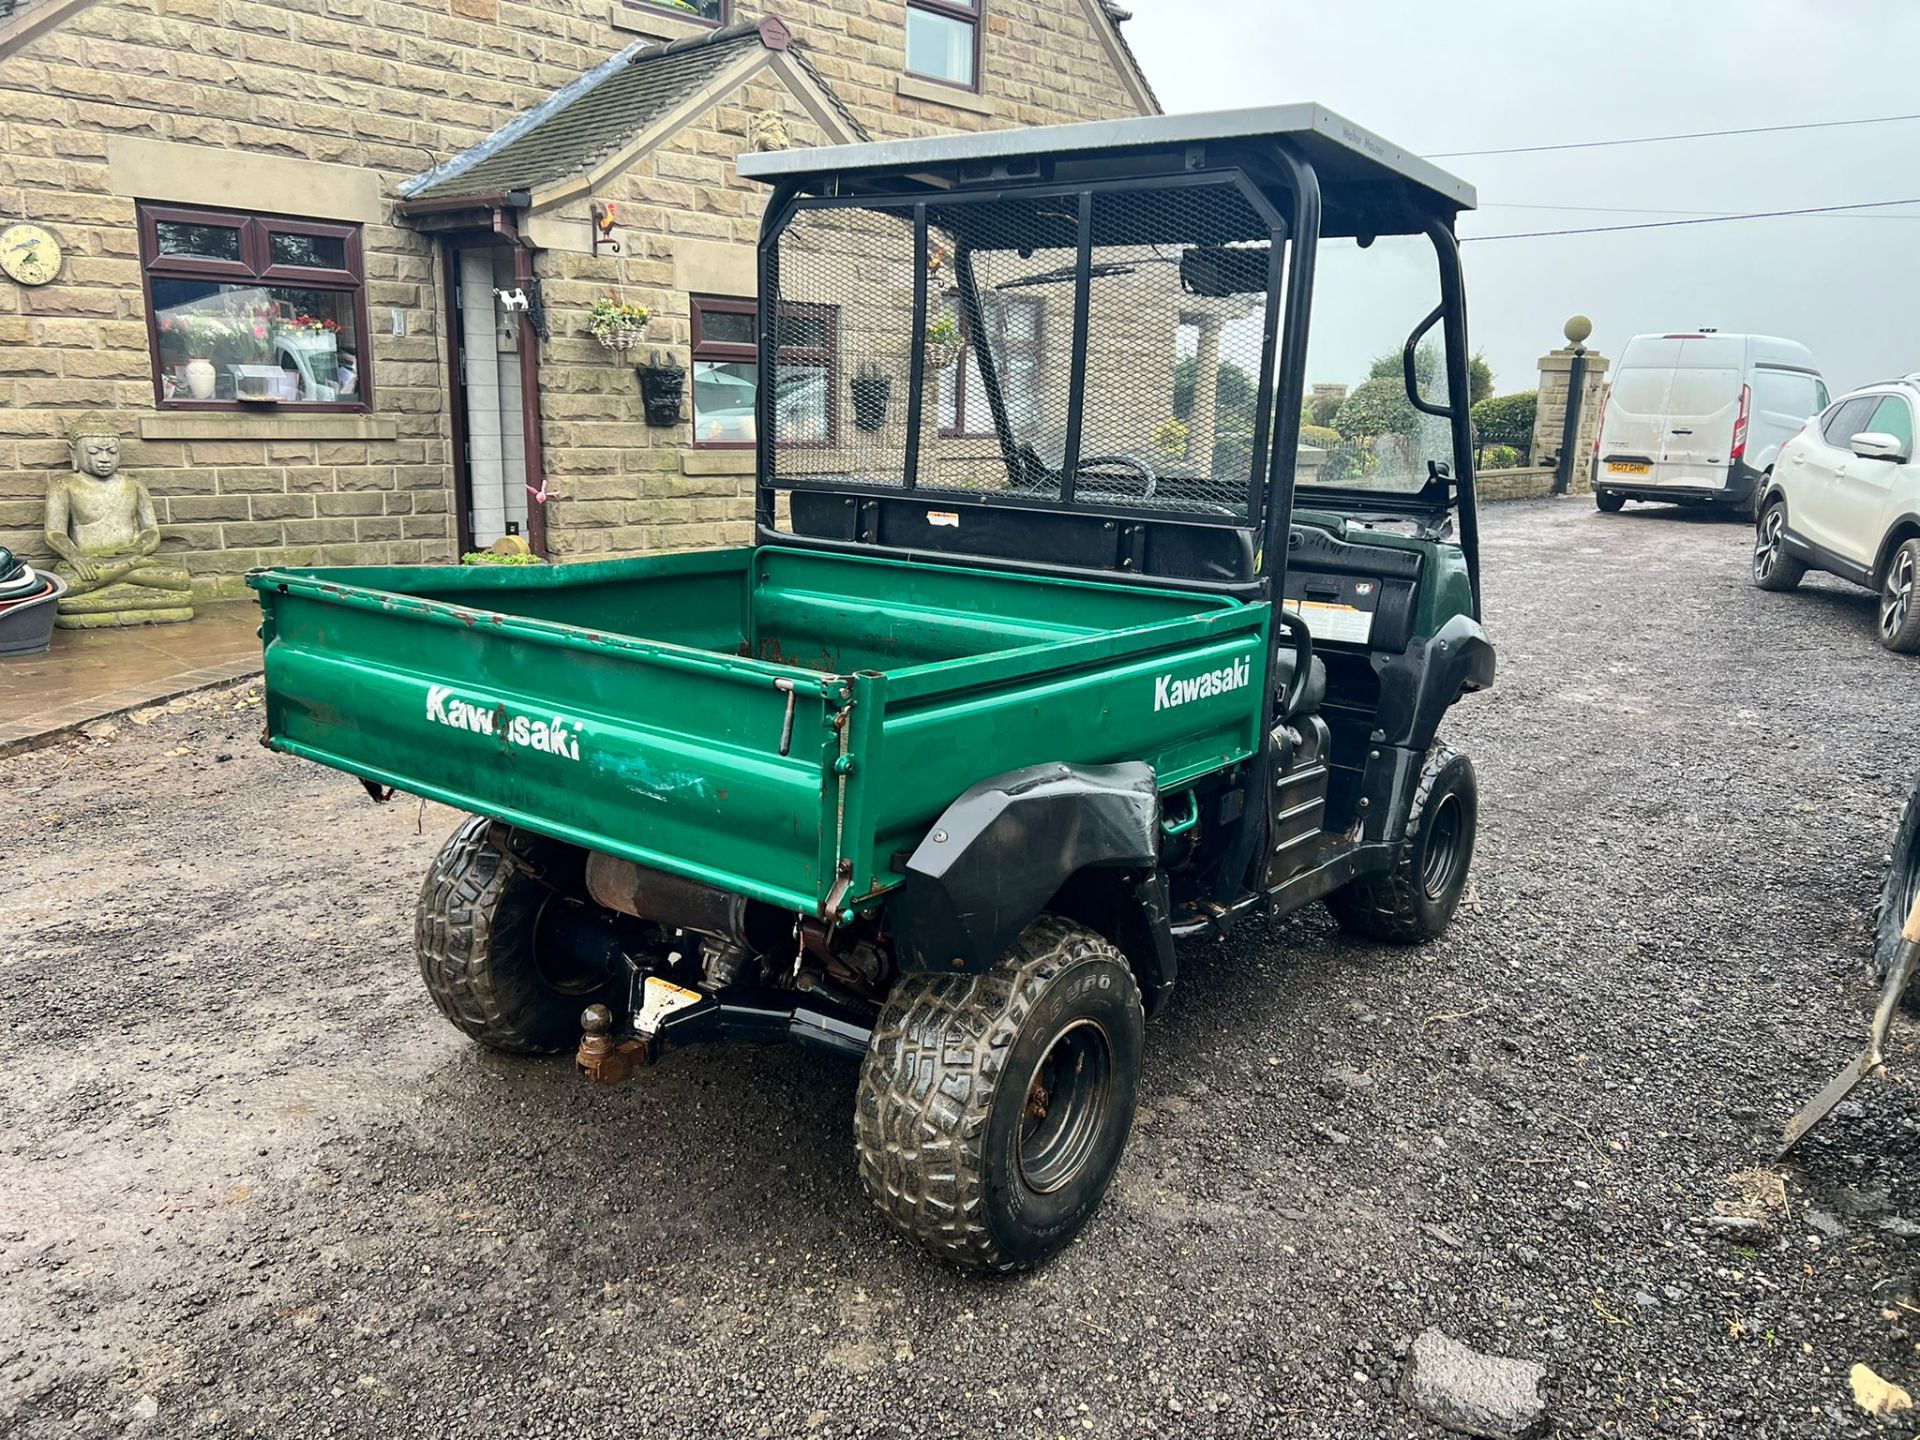 2009 Kawasaki Mule 4010 4WD Buggy/UTV, Runs And Drives, Showing A Low 2425 Hours! *PLUS VAT* - Image 5 of 10